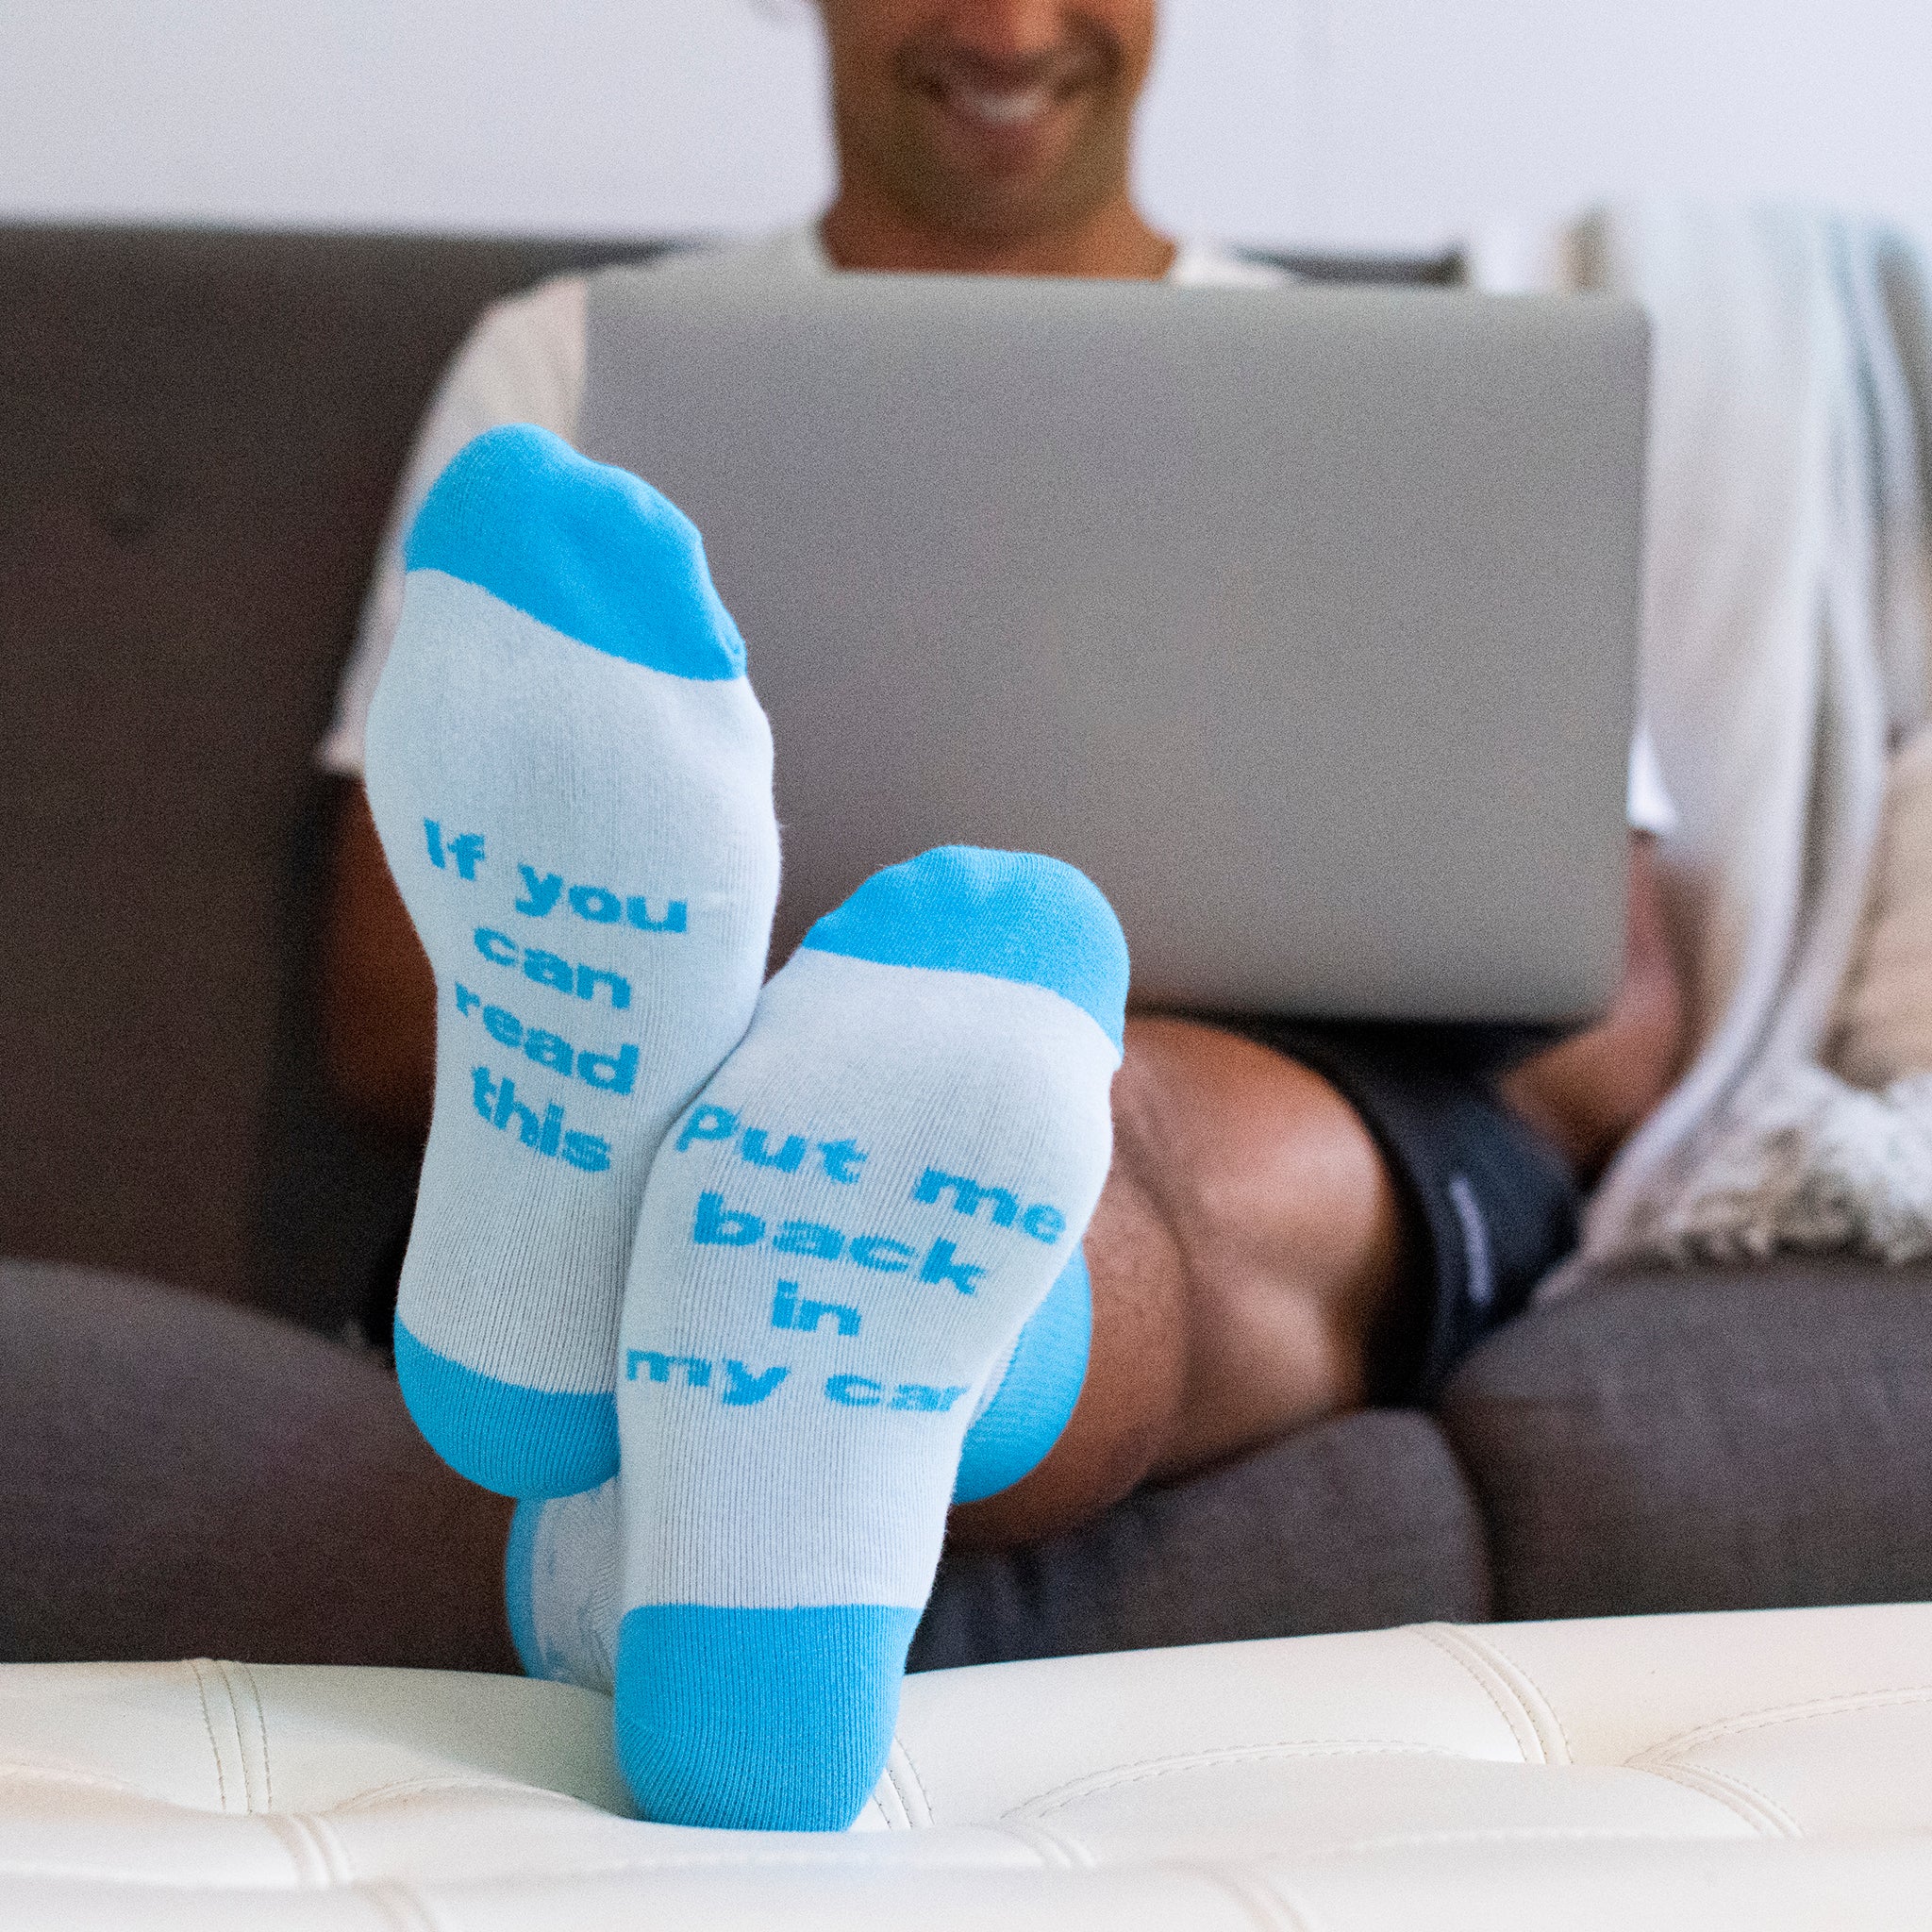 A young man sitting on a couch with a laptop, socked feet resting on an ottoman. The socks read "If you can read this, put me back in my car" in blue. The socks are mainly white with blue tips and heels. Designed exclusively for The Shop by Hagerty.